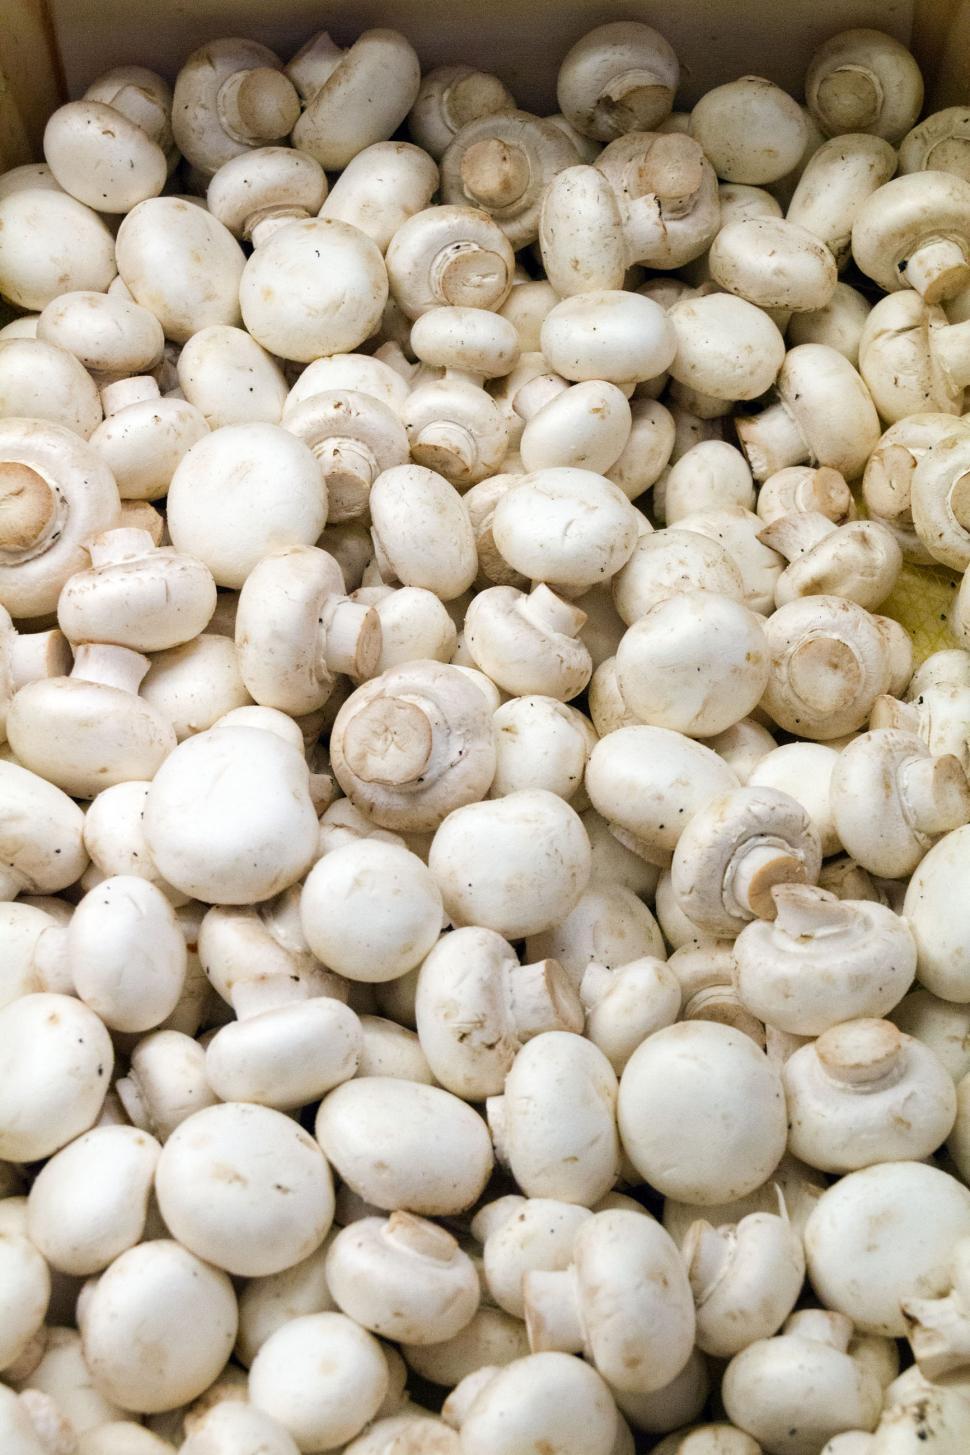 Free Image of Button Mushrooms 